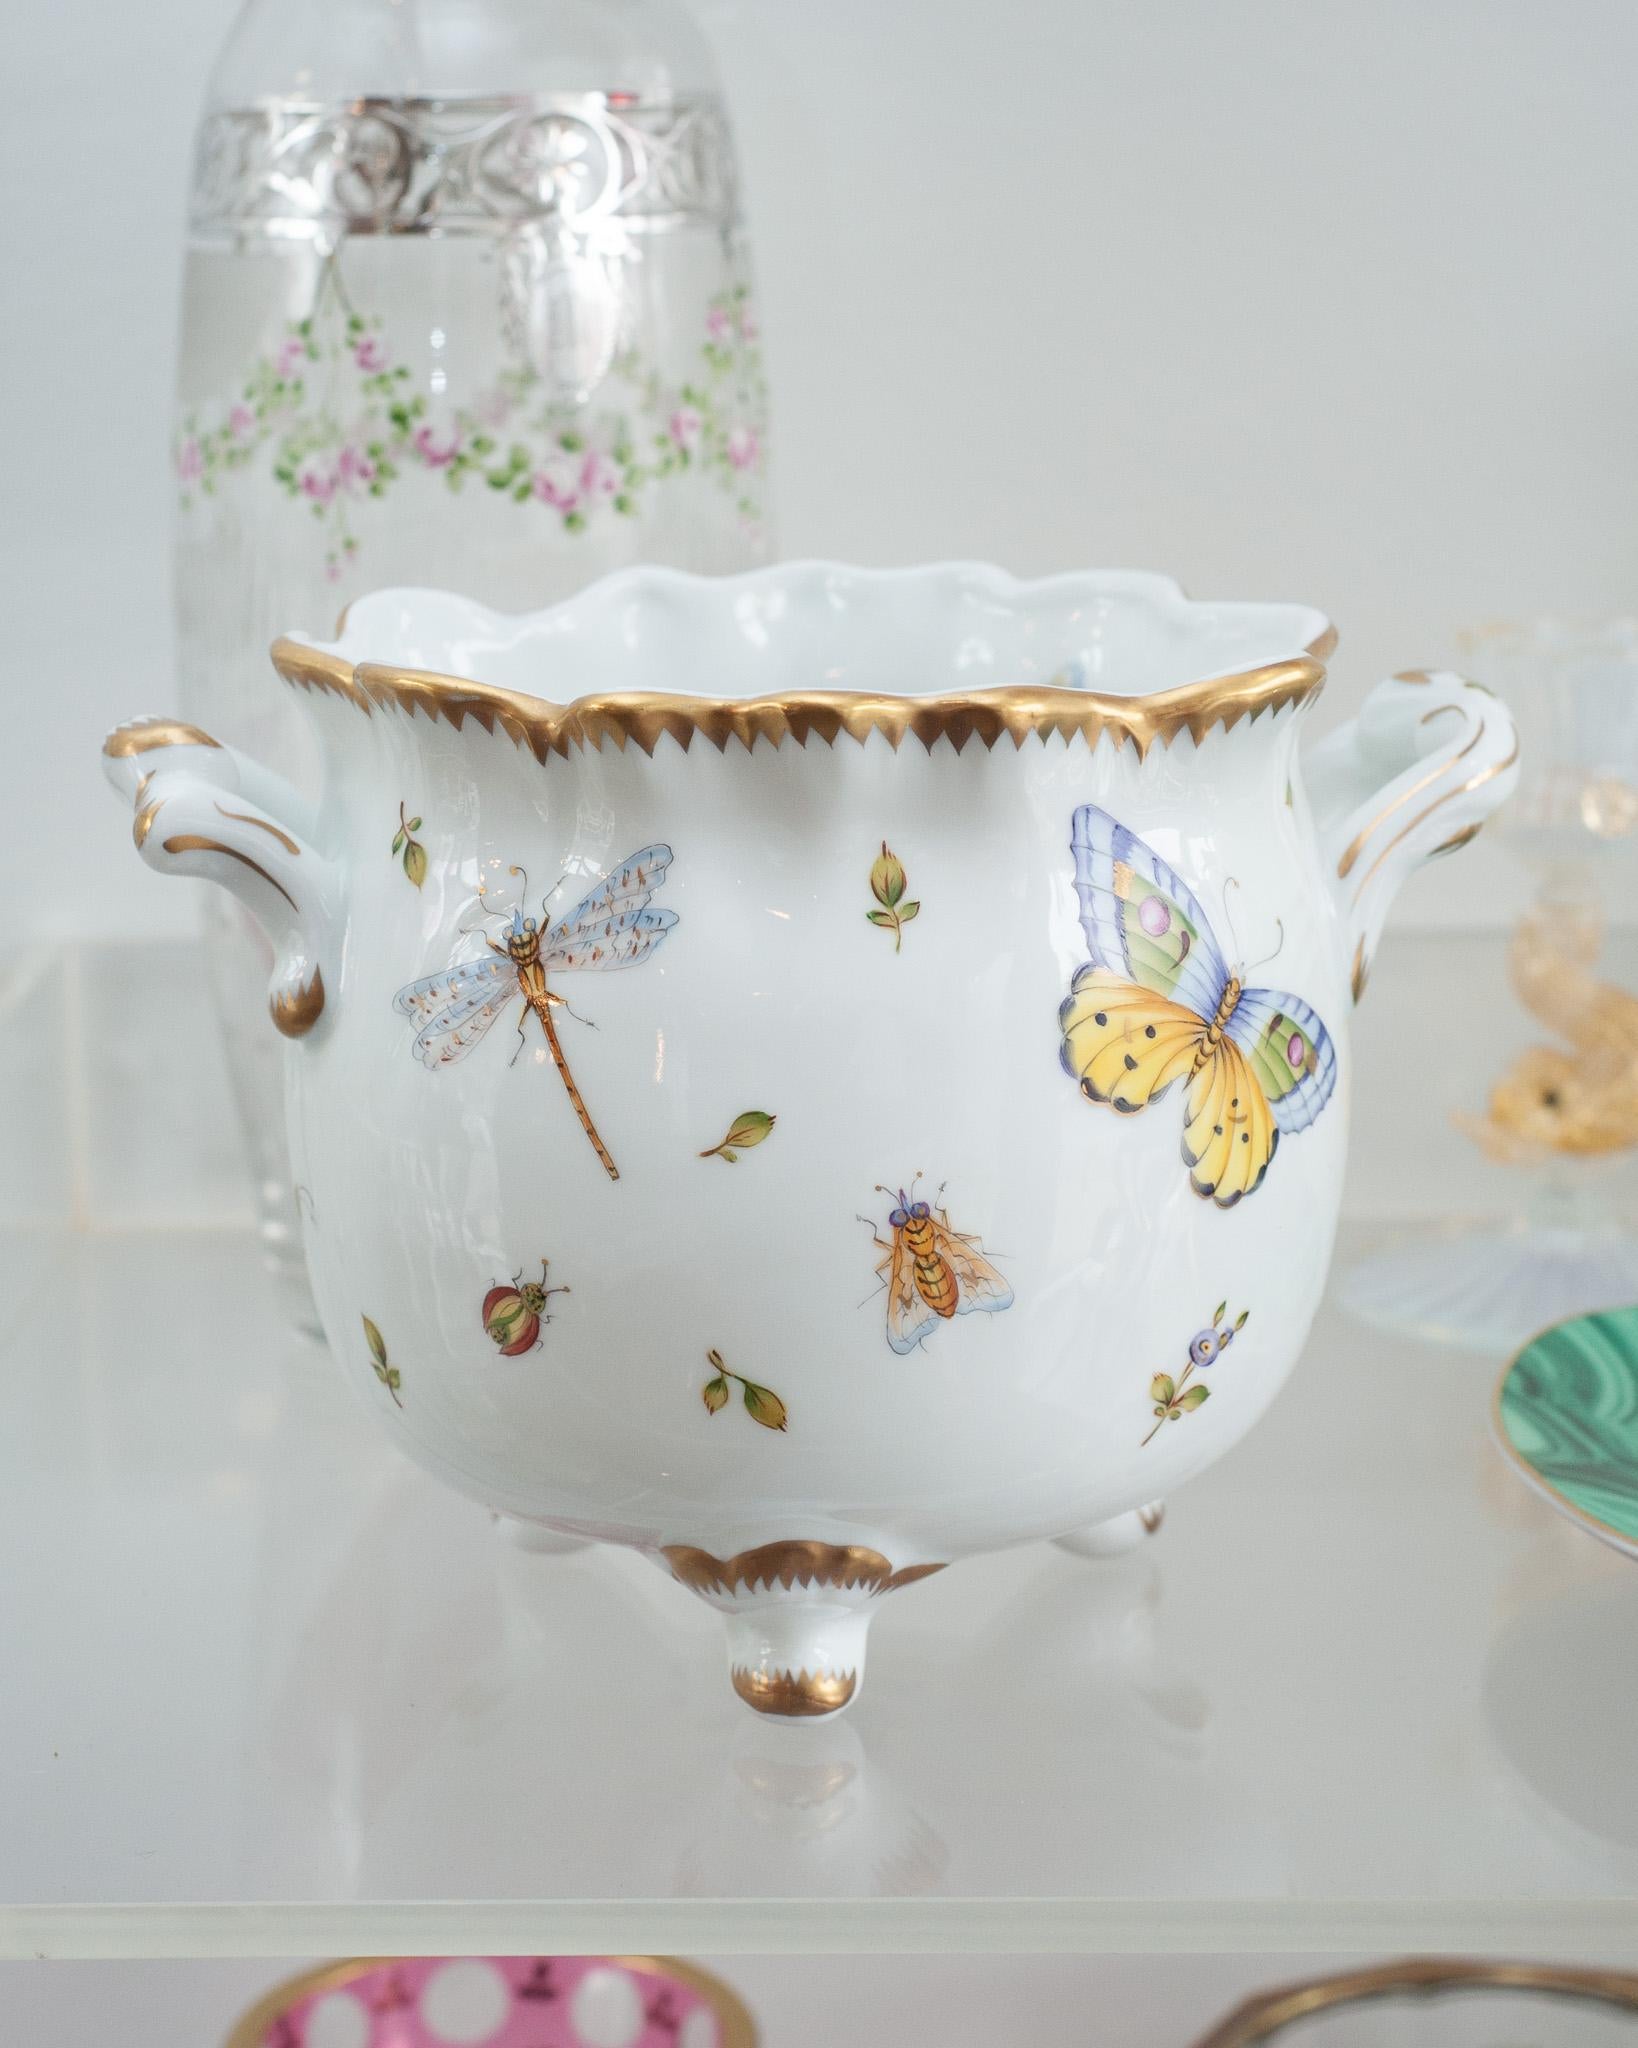 A beautiful hand painted footed cachepot / planter with handles, by Anna Weatherley Designs. Featuring hand painted butterflies, insect and floral motifs. Anna Weatherley has been designing and producing Fine Botanical Hand Painted Porcelain in